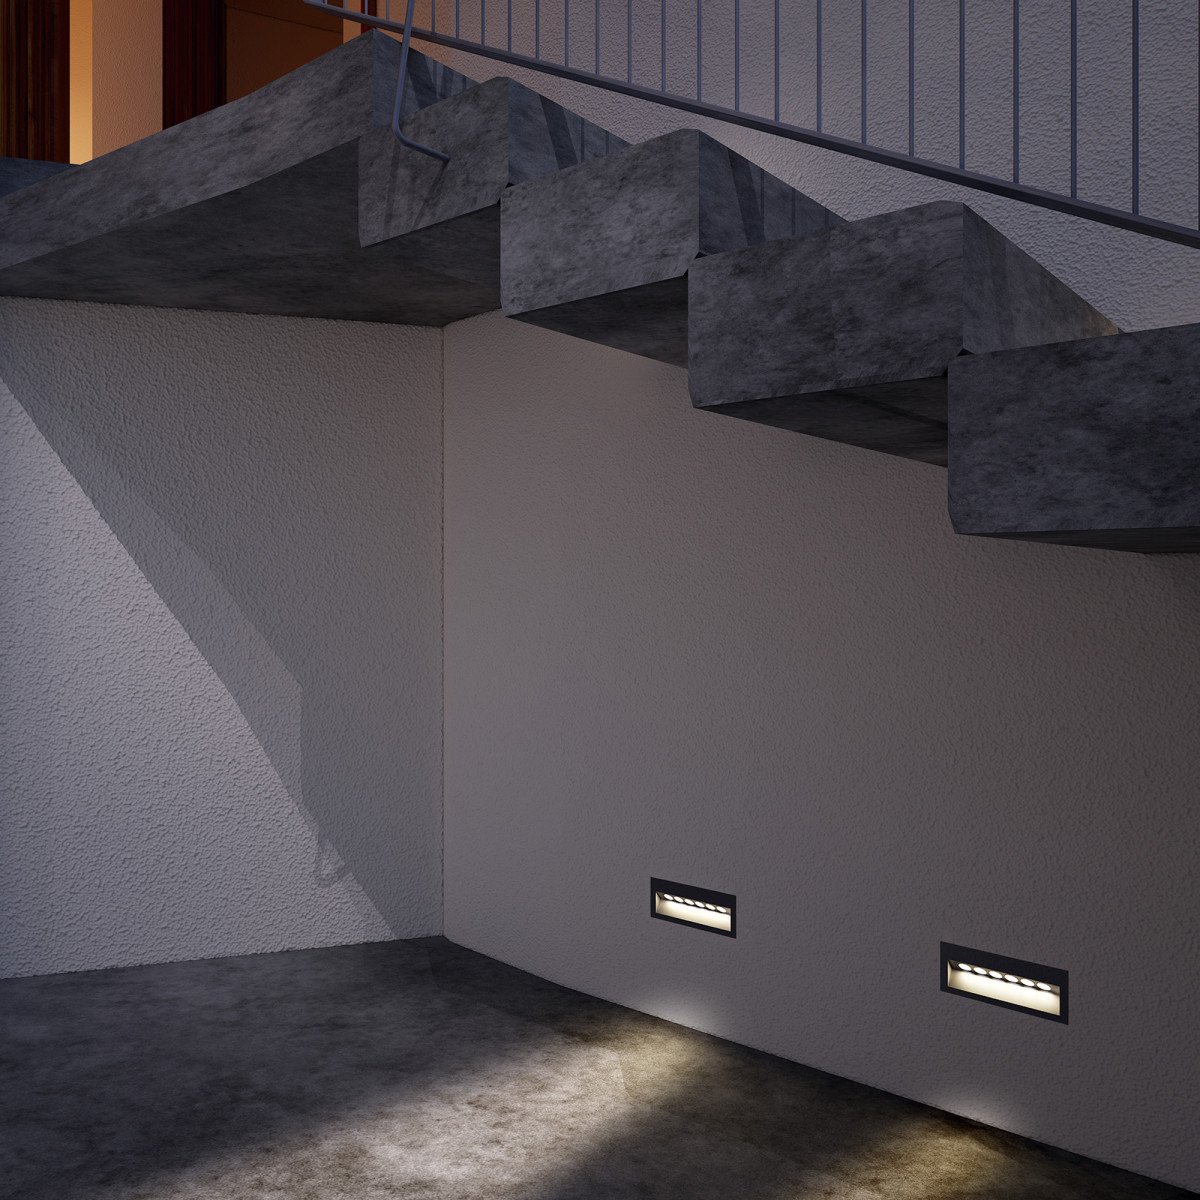 LED recessed wall light Source